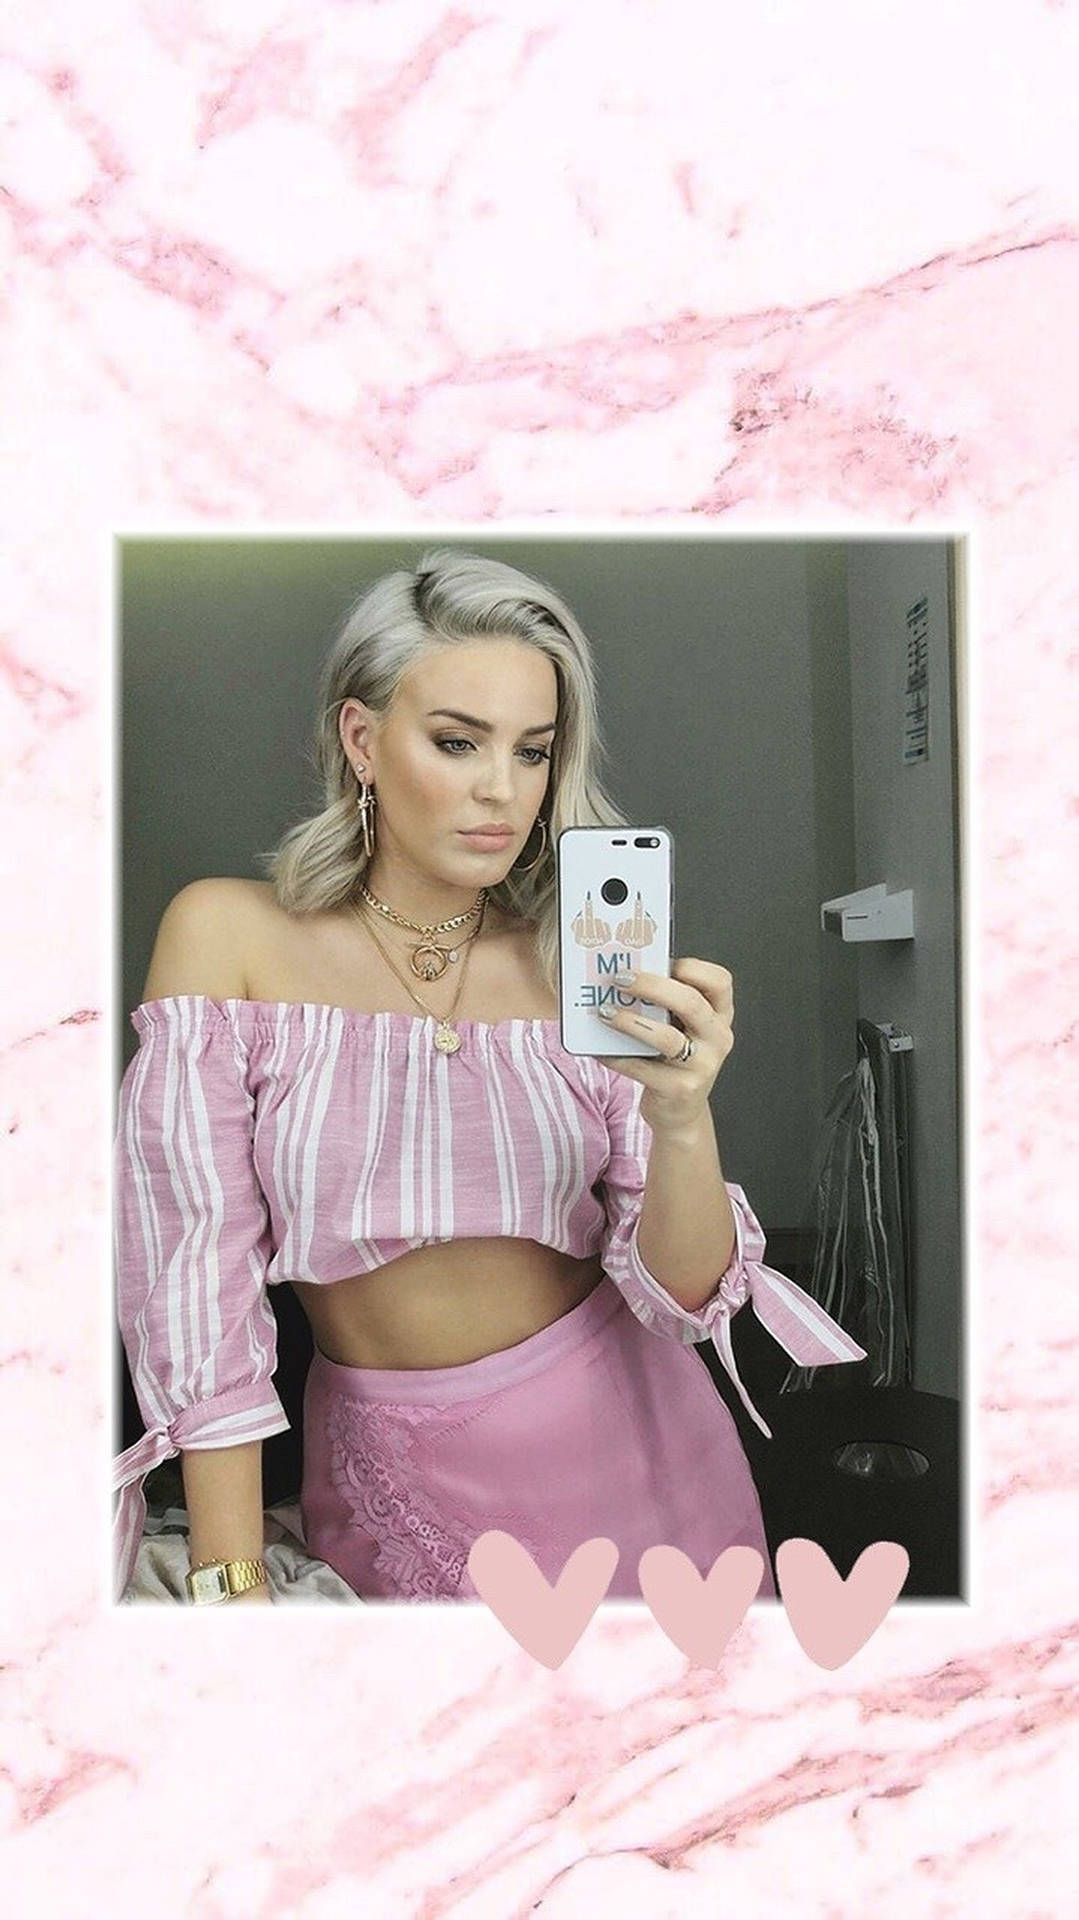 Anne-marie Pink Aesthetic